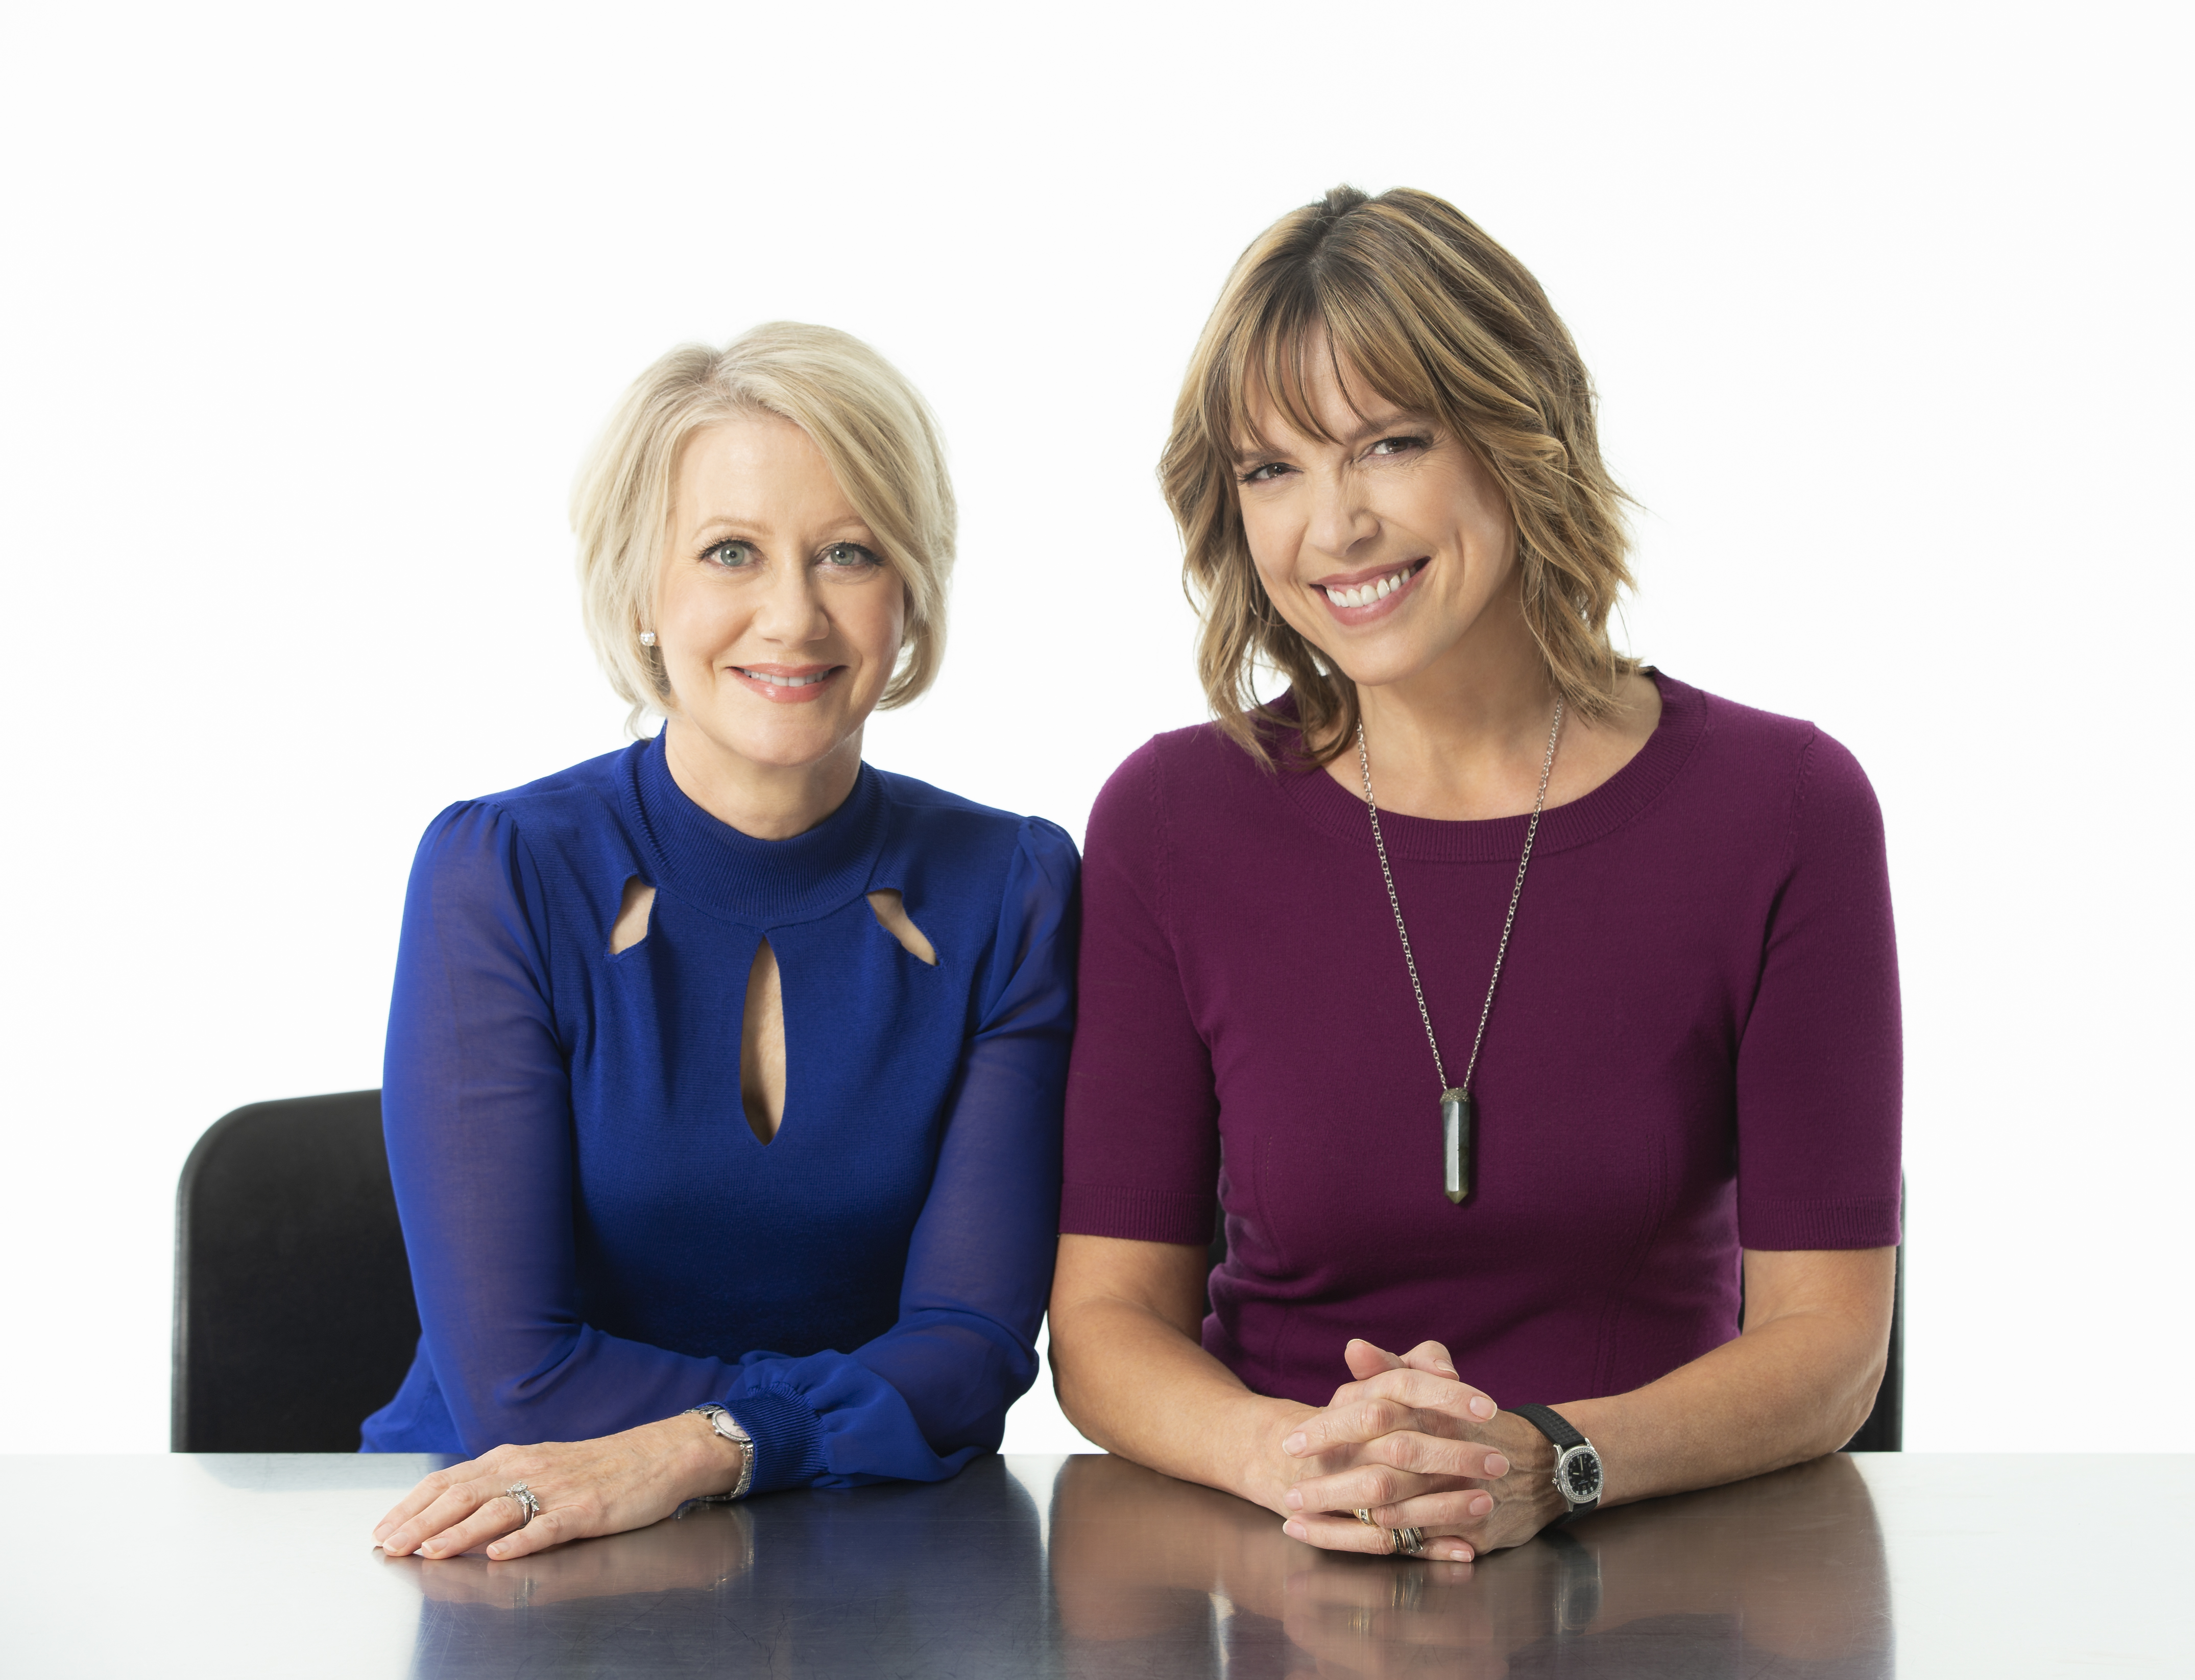 Behind the Mic Hannah Storm, Andrea Kremer Become First Female Broadcasting Team in NFL History; NHL on NBC Release Names for 2018-19 Season